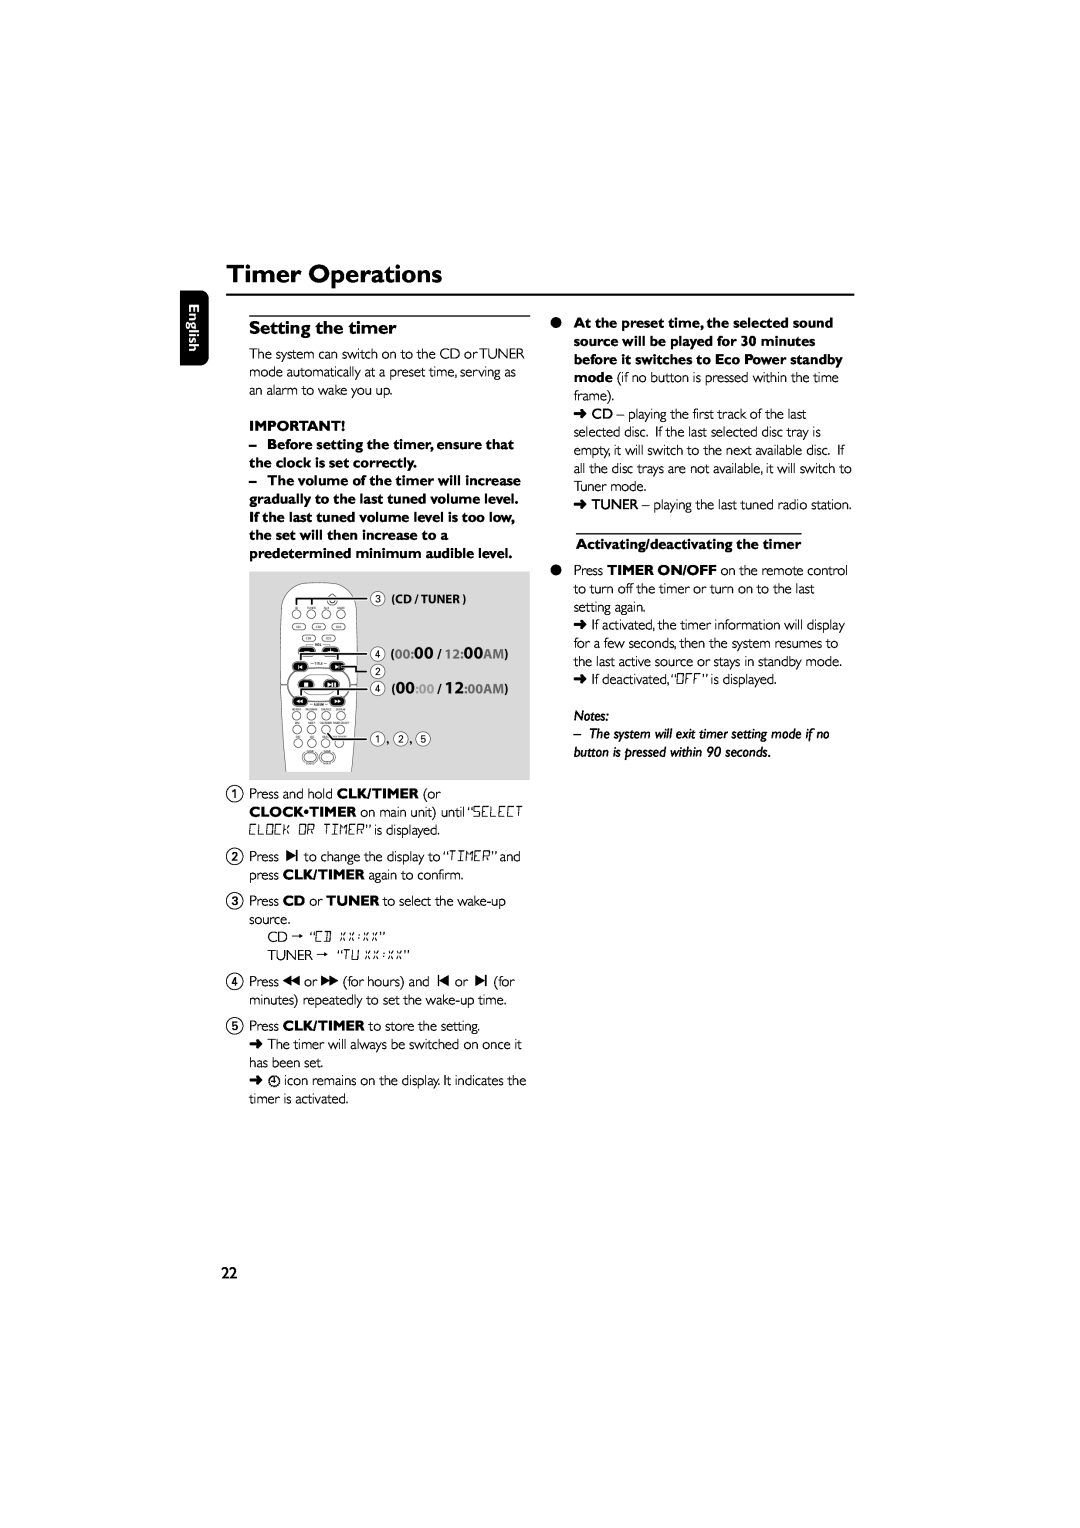 Philips FWM569/37B warranty Timer Operations, Setting the timer, English, Activating/deactivating the timer 